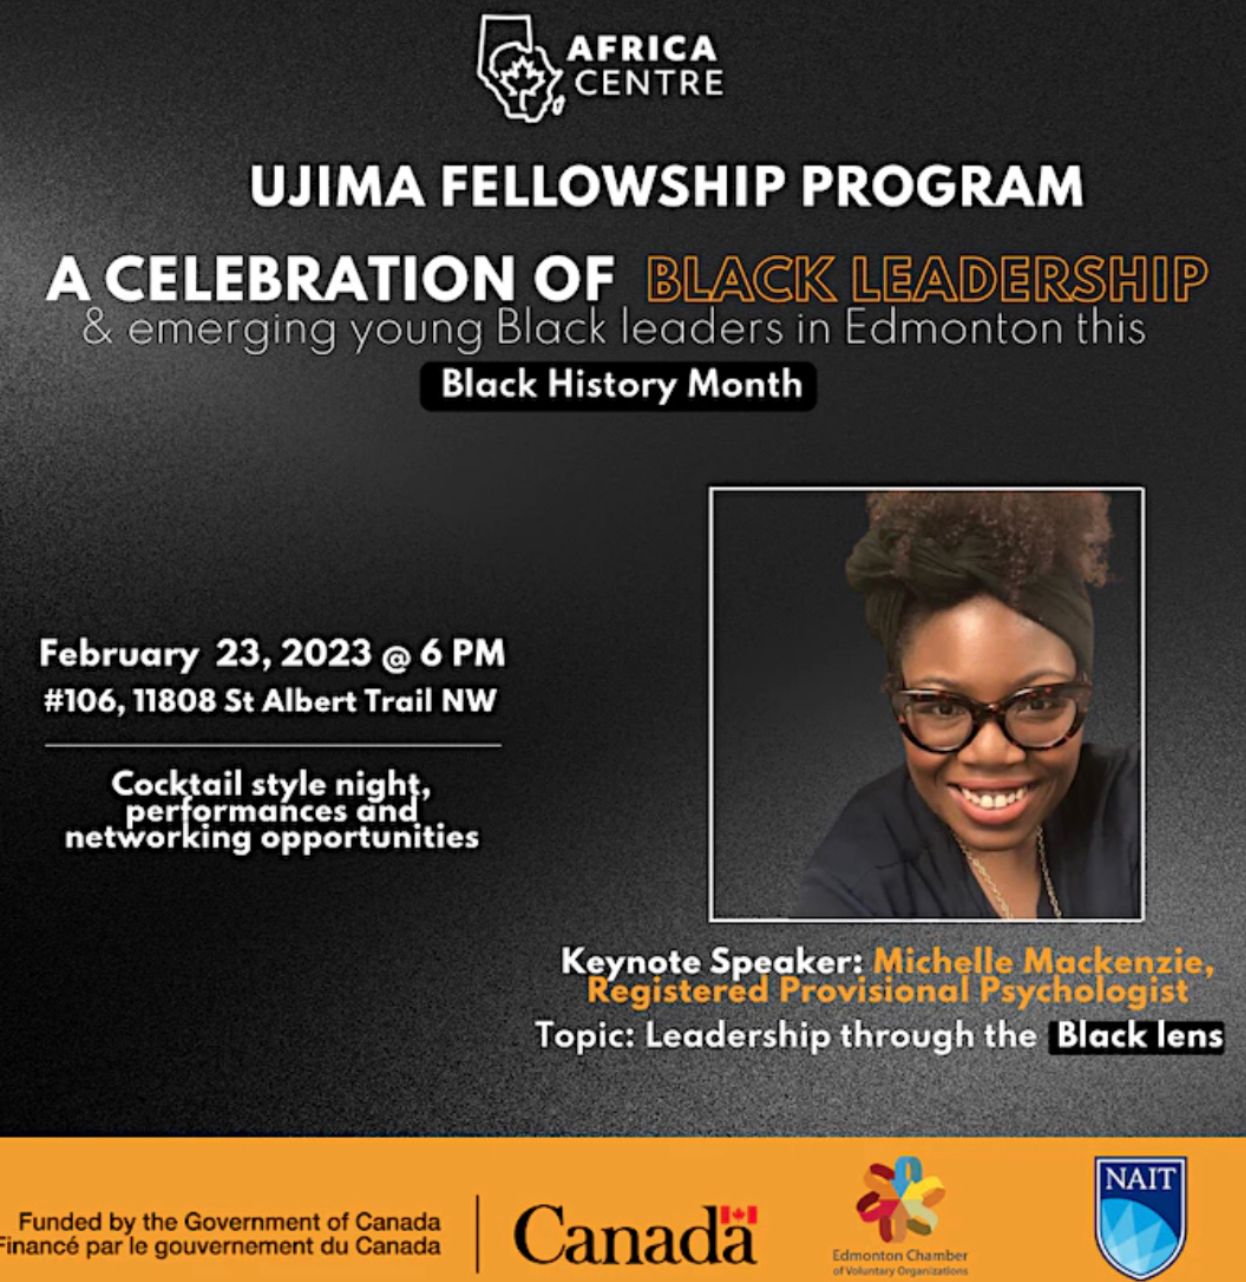 Celebrate emerging young black leaders in the Edmonton community!